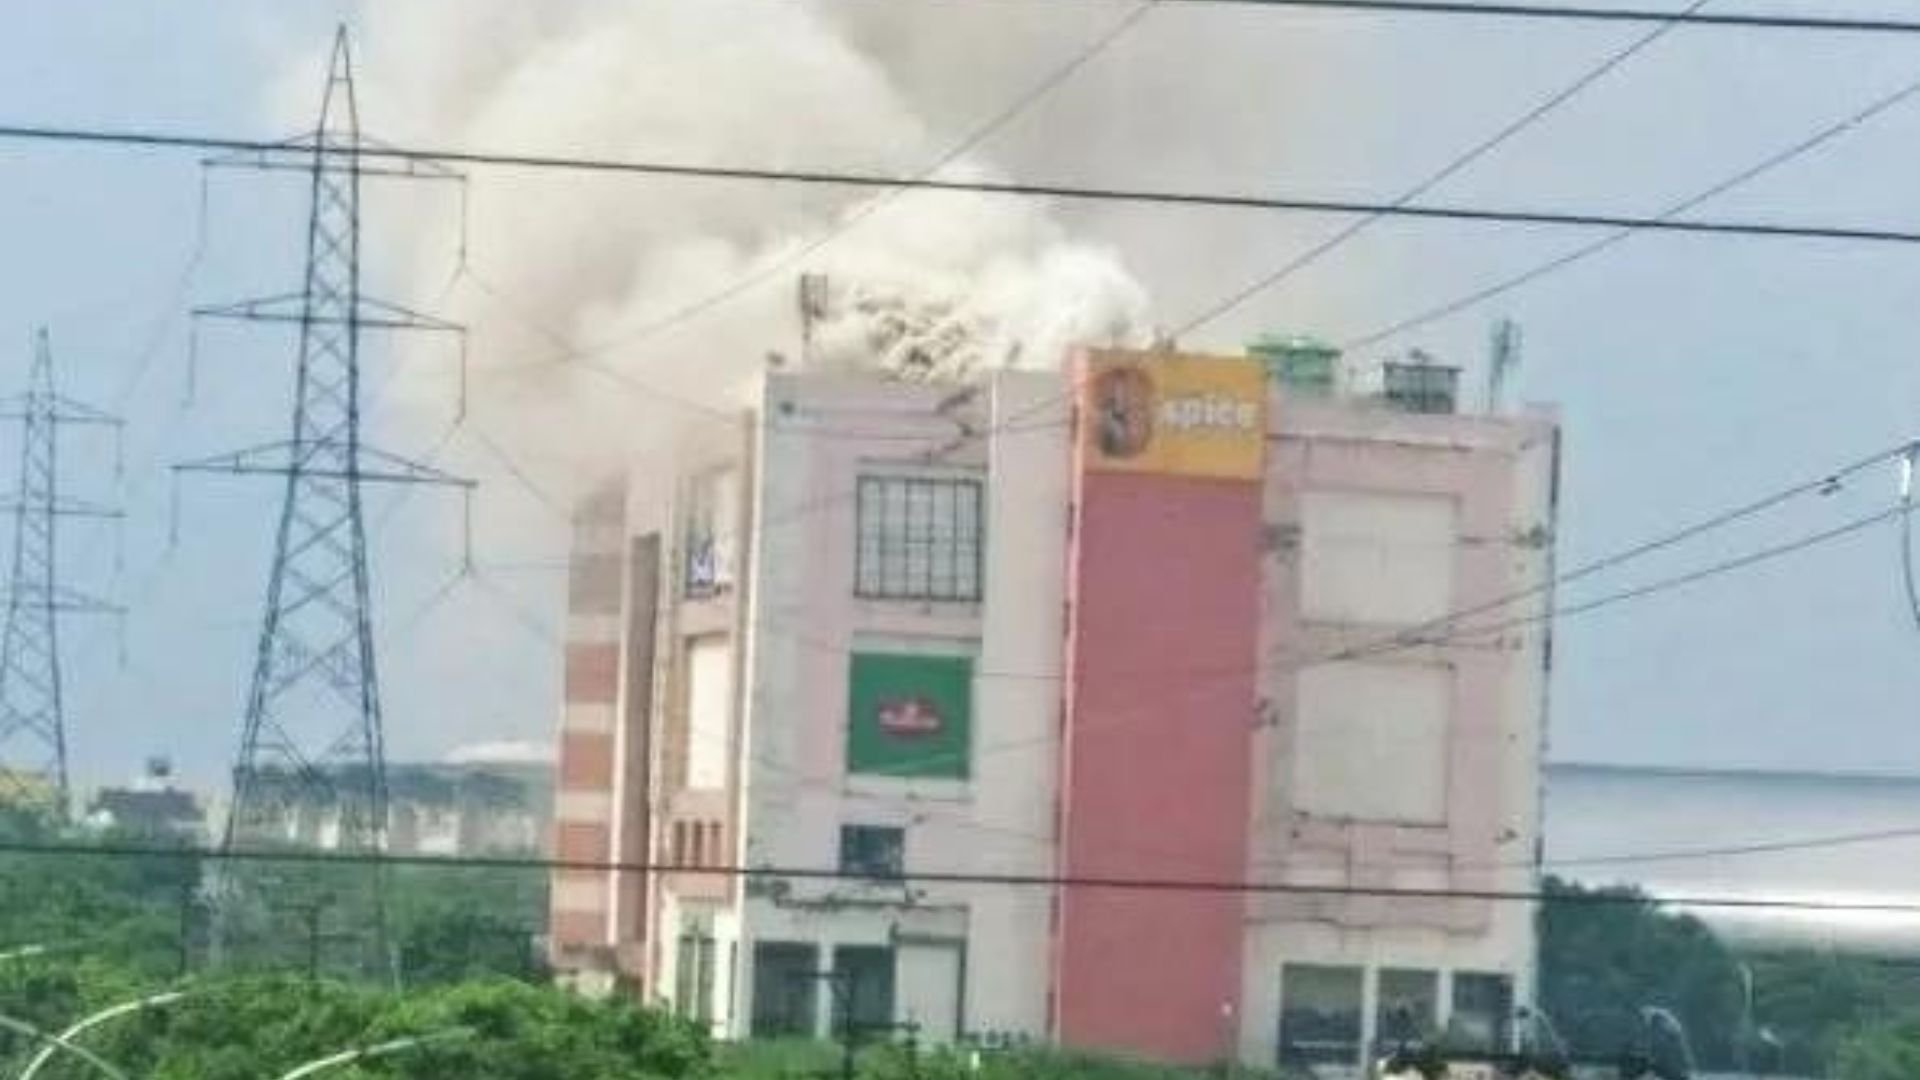 Massive Fire Eruption at Greater Noida Mall, Flames Can Be Seen From Miles Away (1)